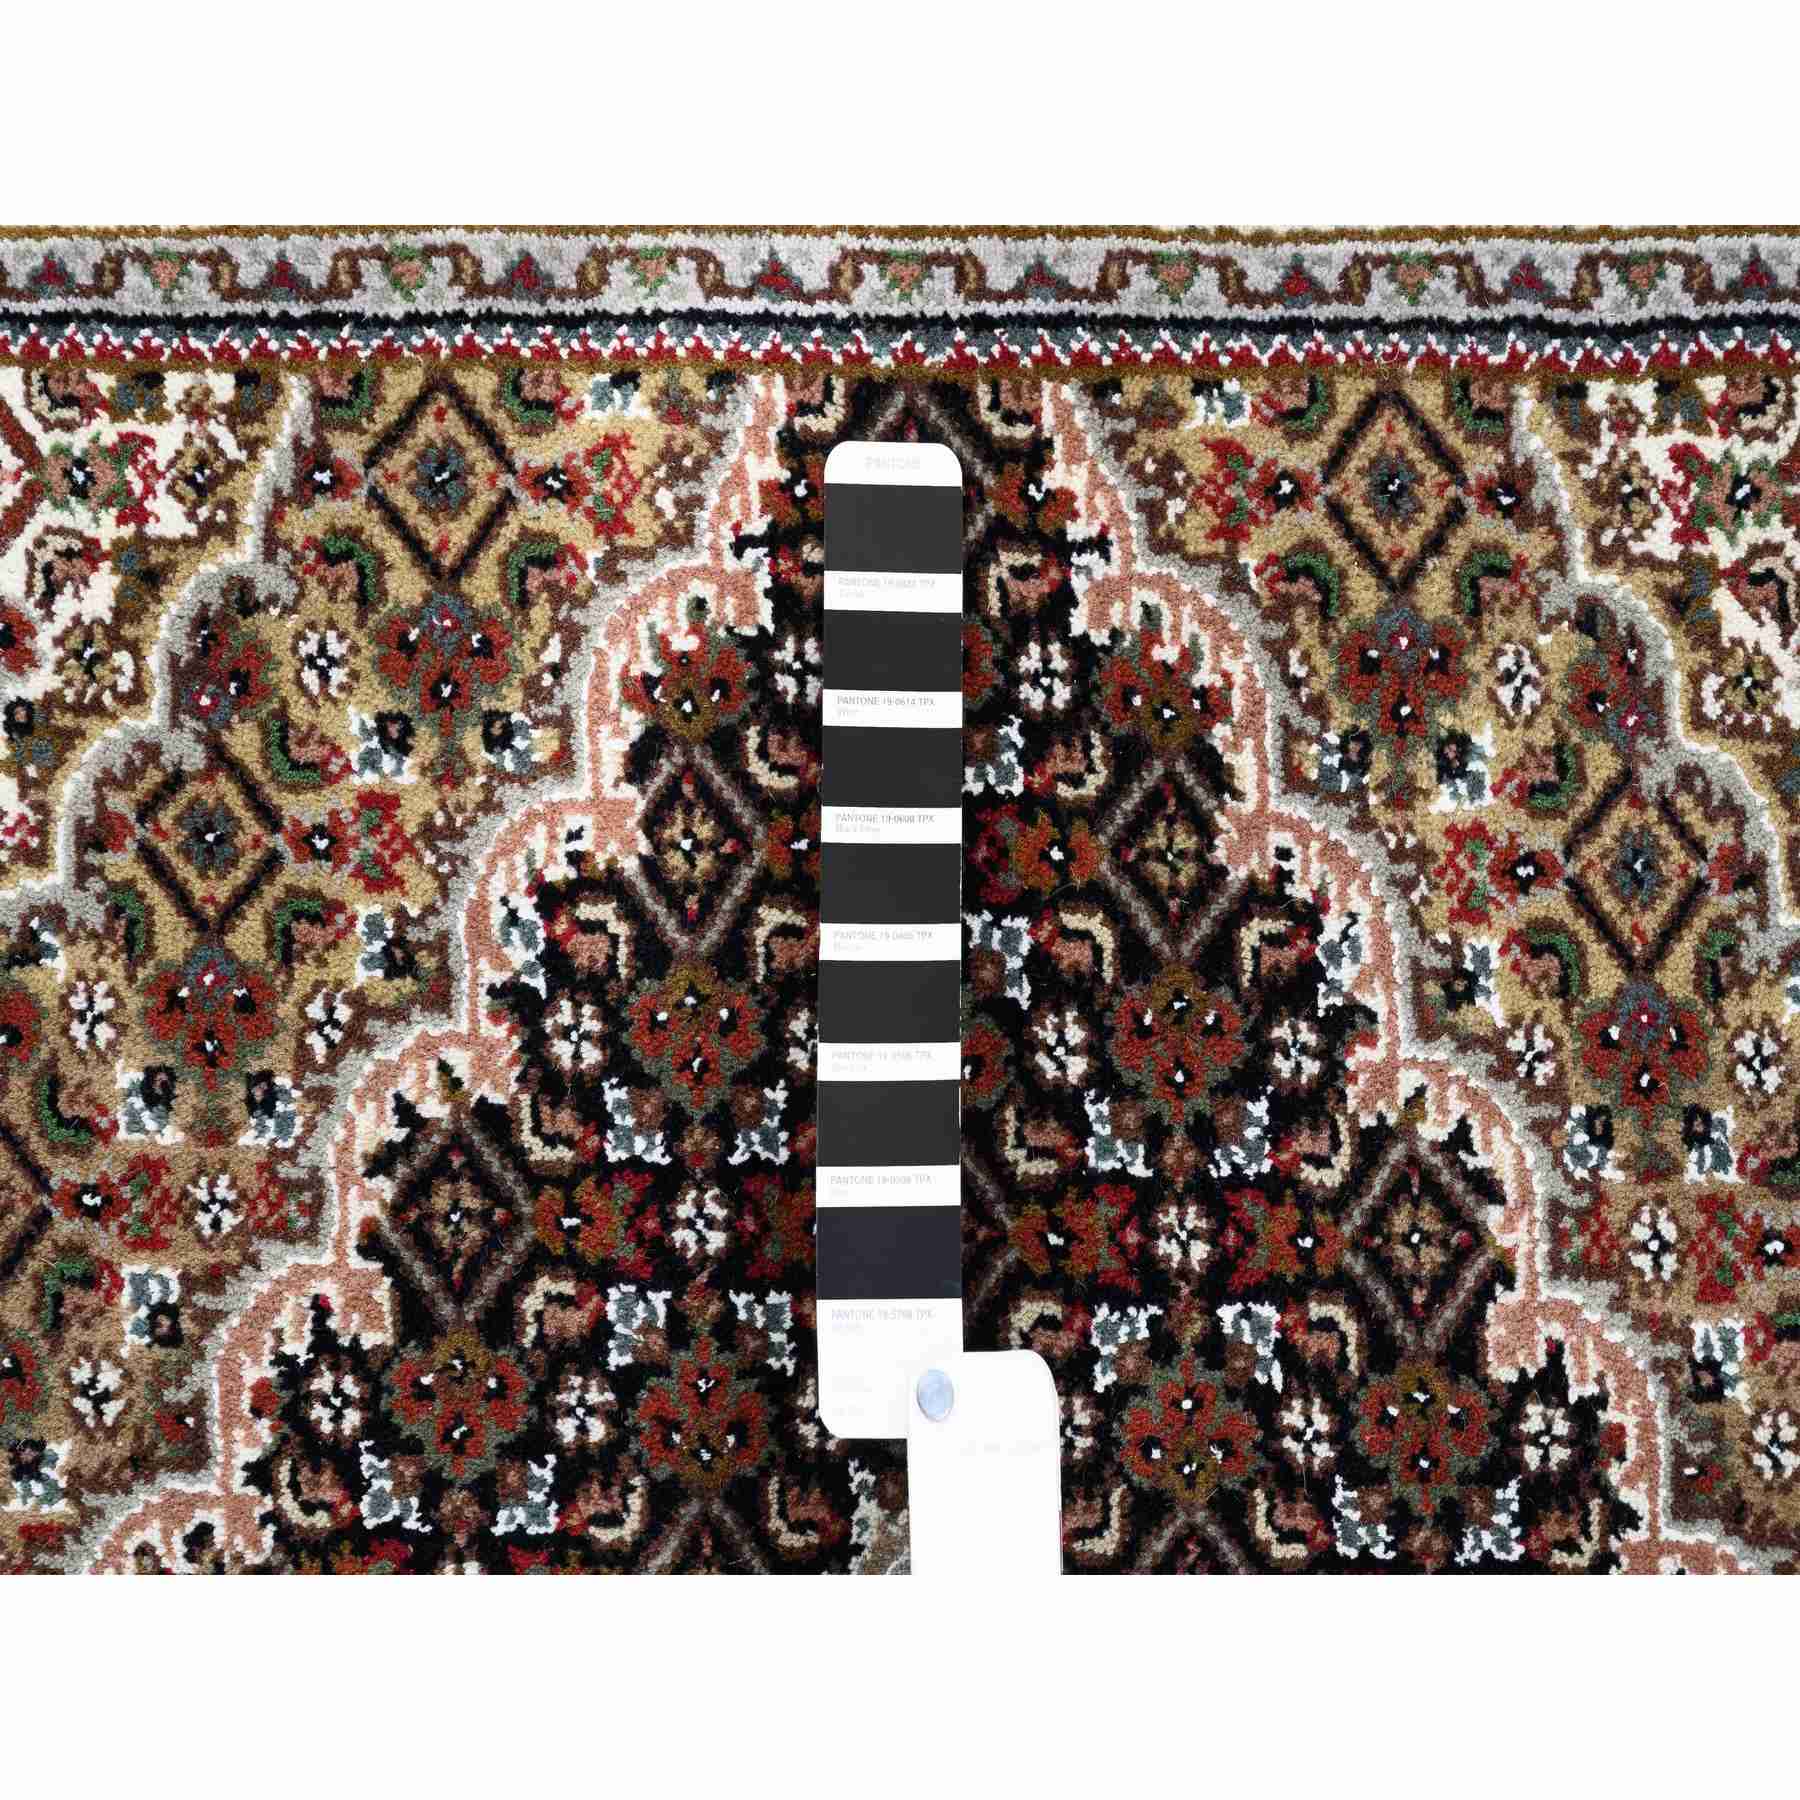 Fine-Oriental-Hand-Knotted-Rug-312665